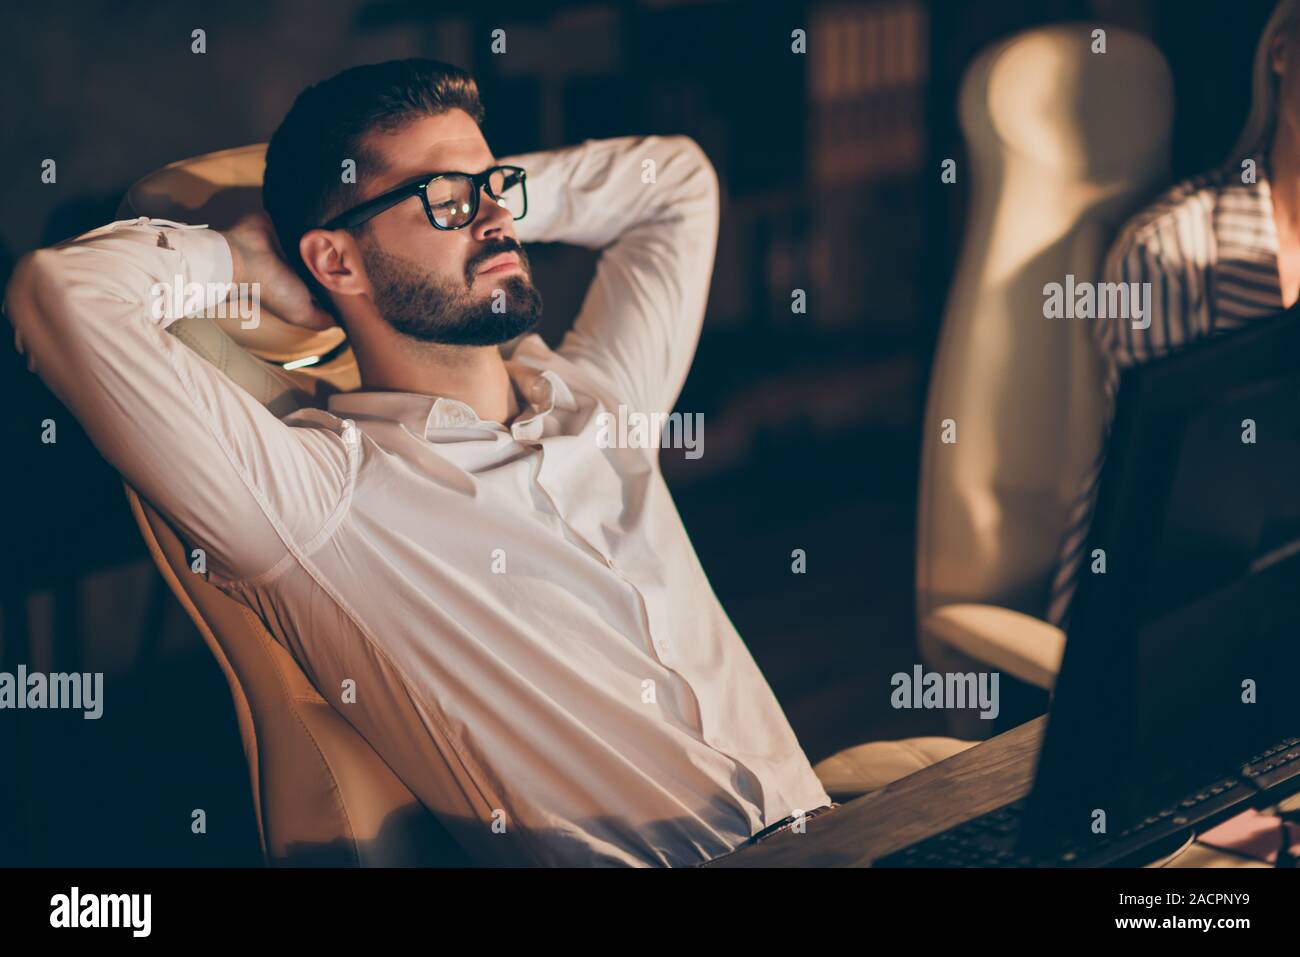 Portrait of his he nice attractive chic intellectual successful guy company owner founder sitting in chair working late evening having pause break at Stock Photo